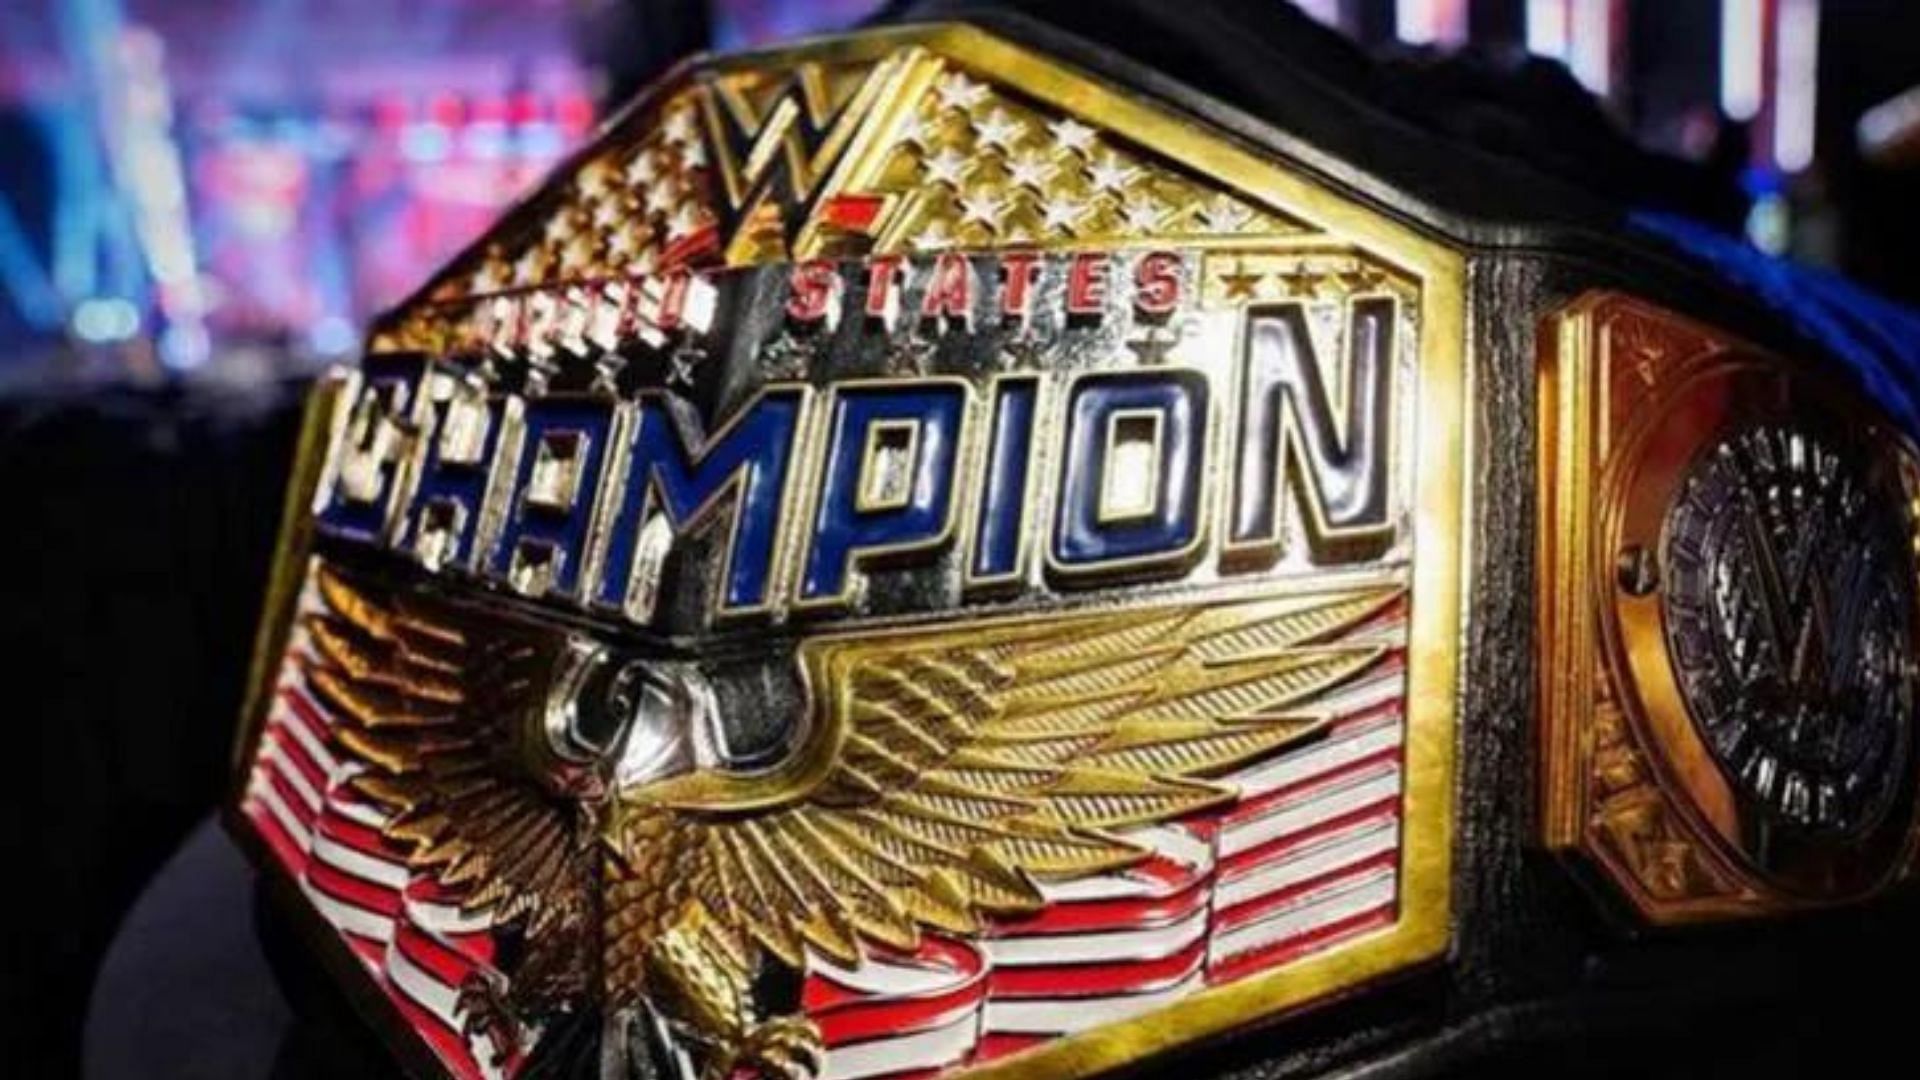 Which former WWE United States Champion is excited to get back in the ring?